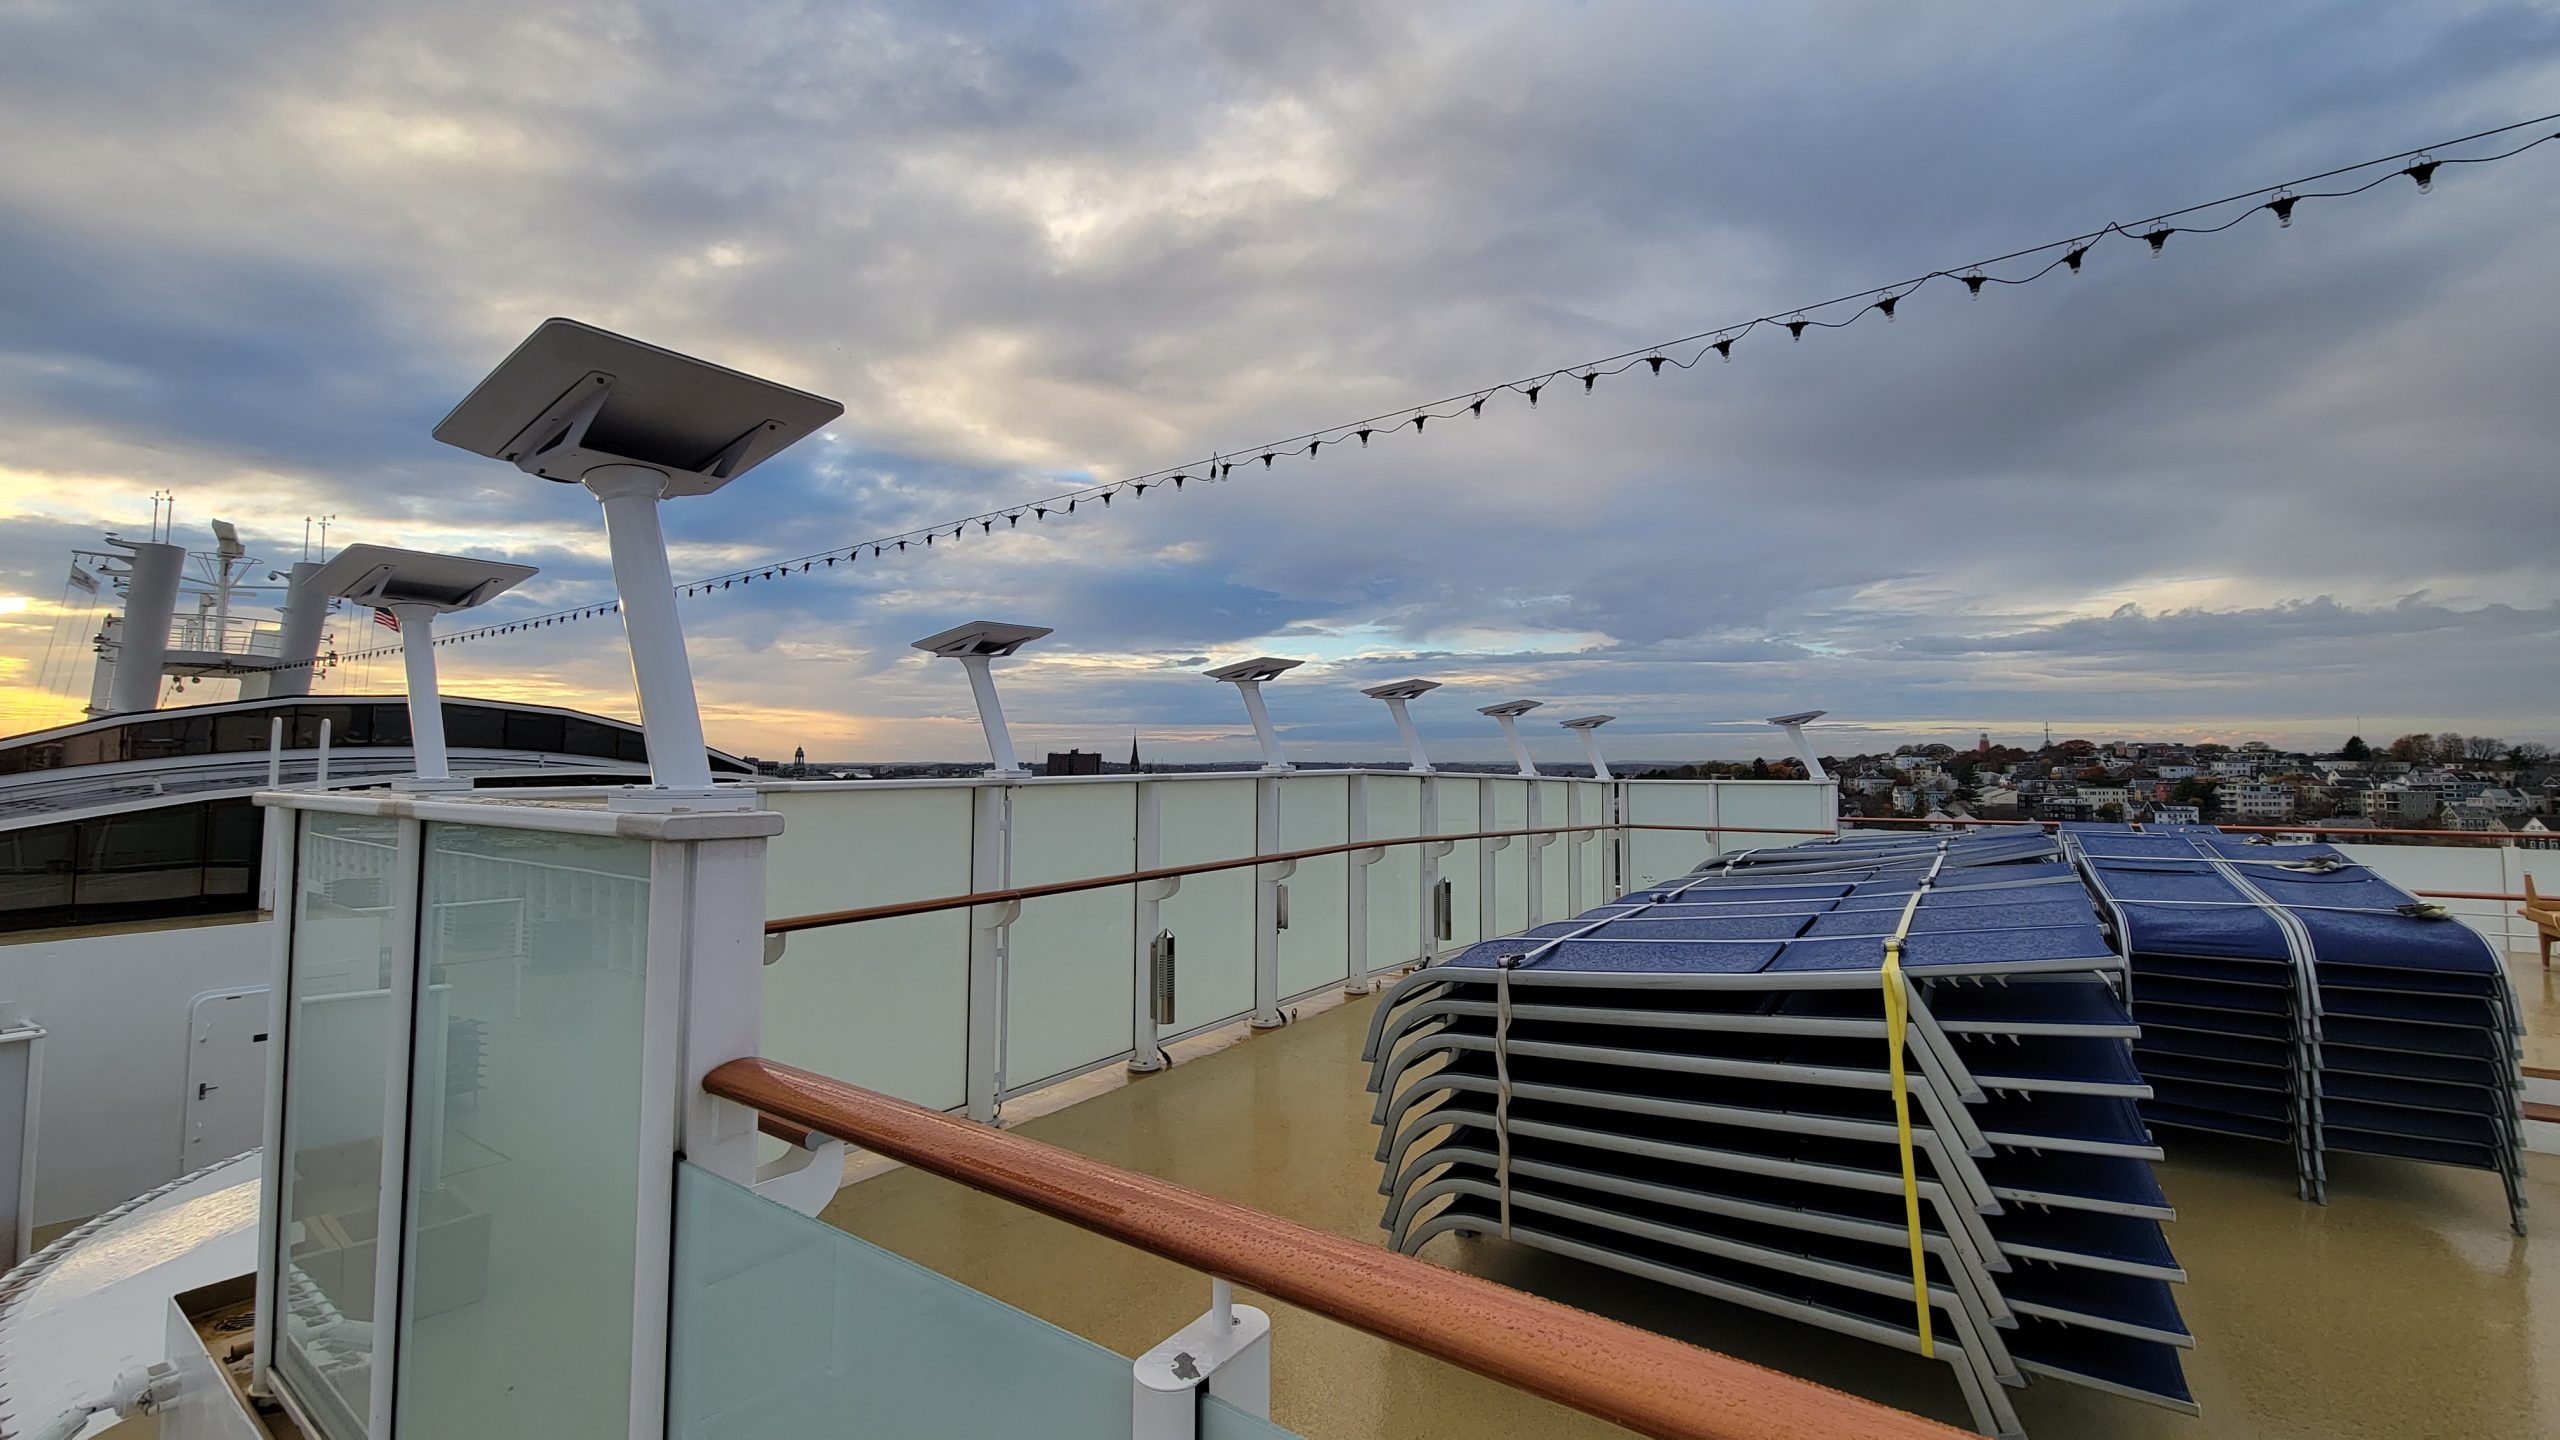 11 Starlink dishes spotted on a Norwegian Breakaway cruise 14